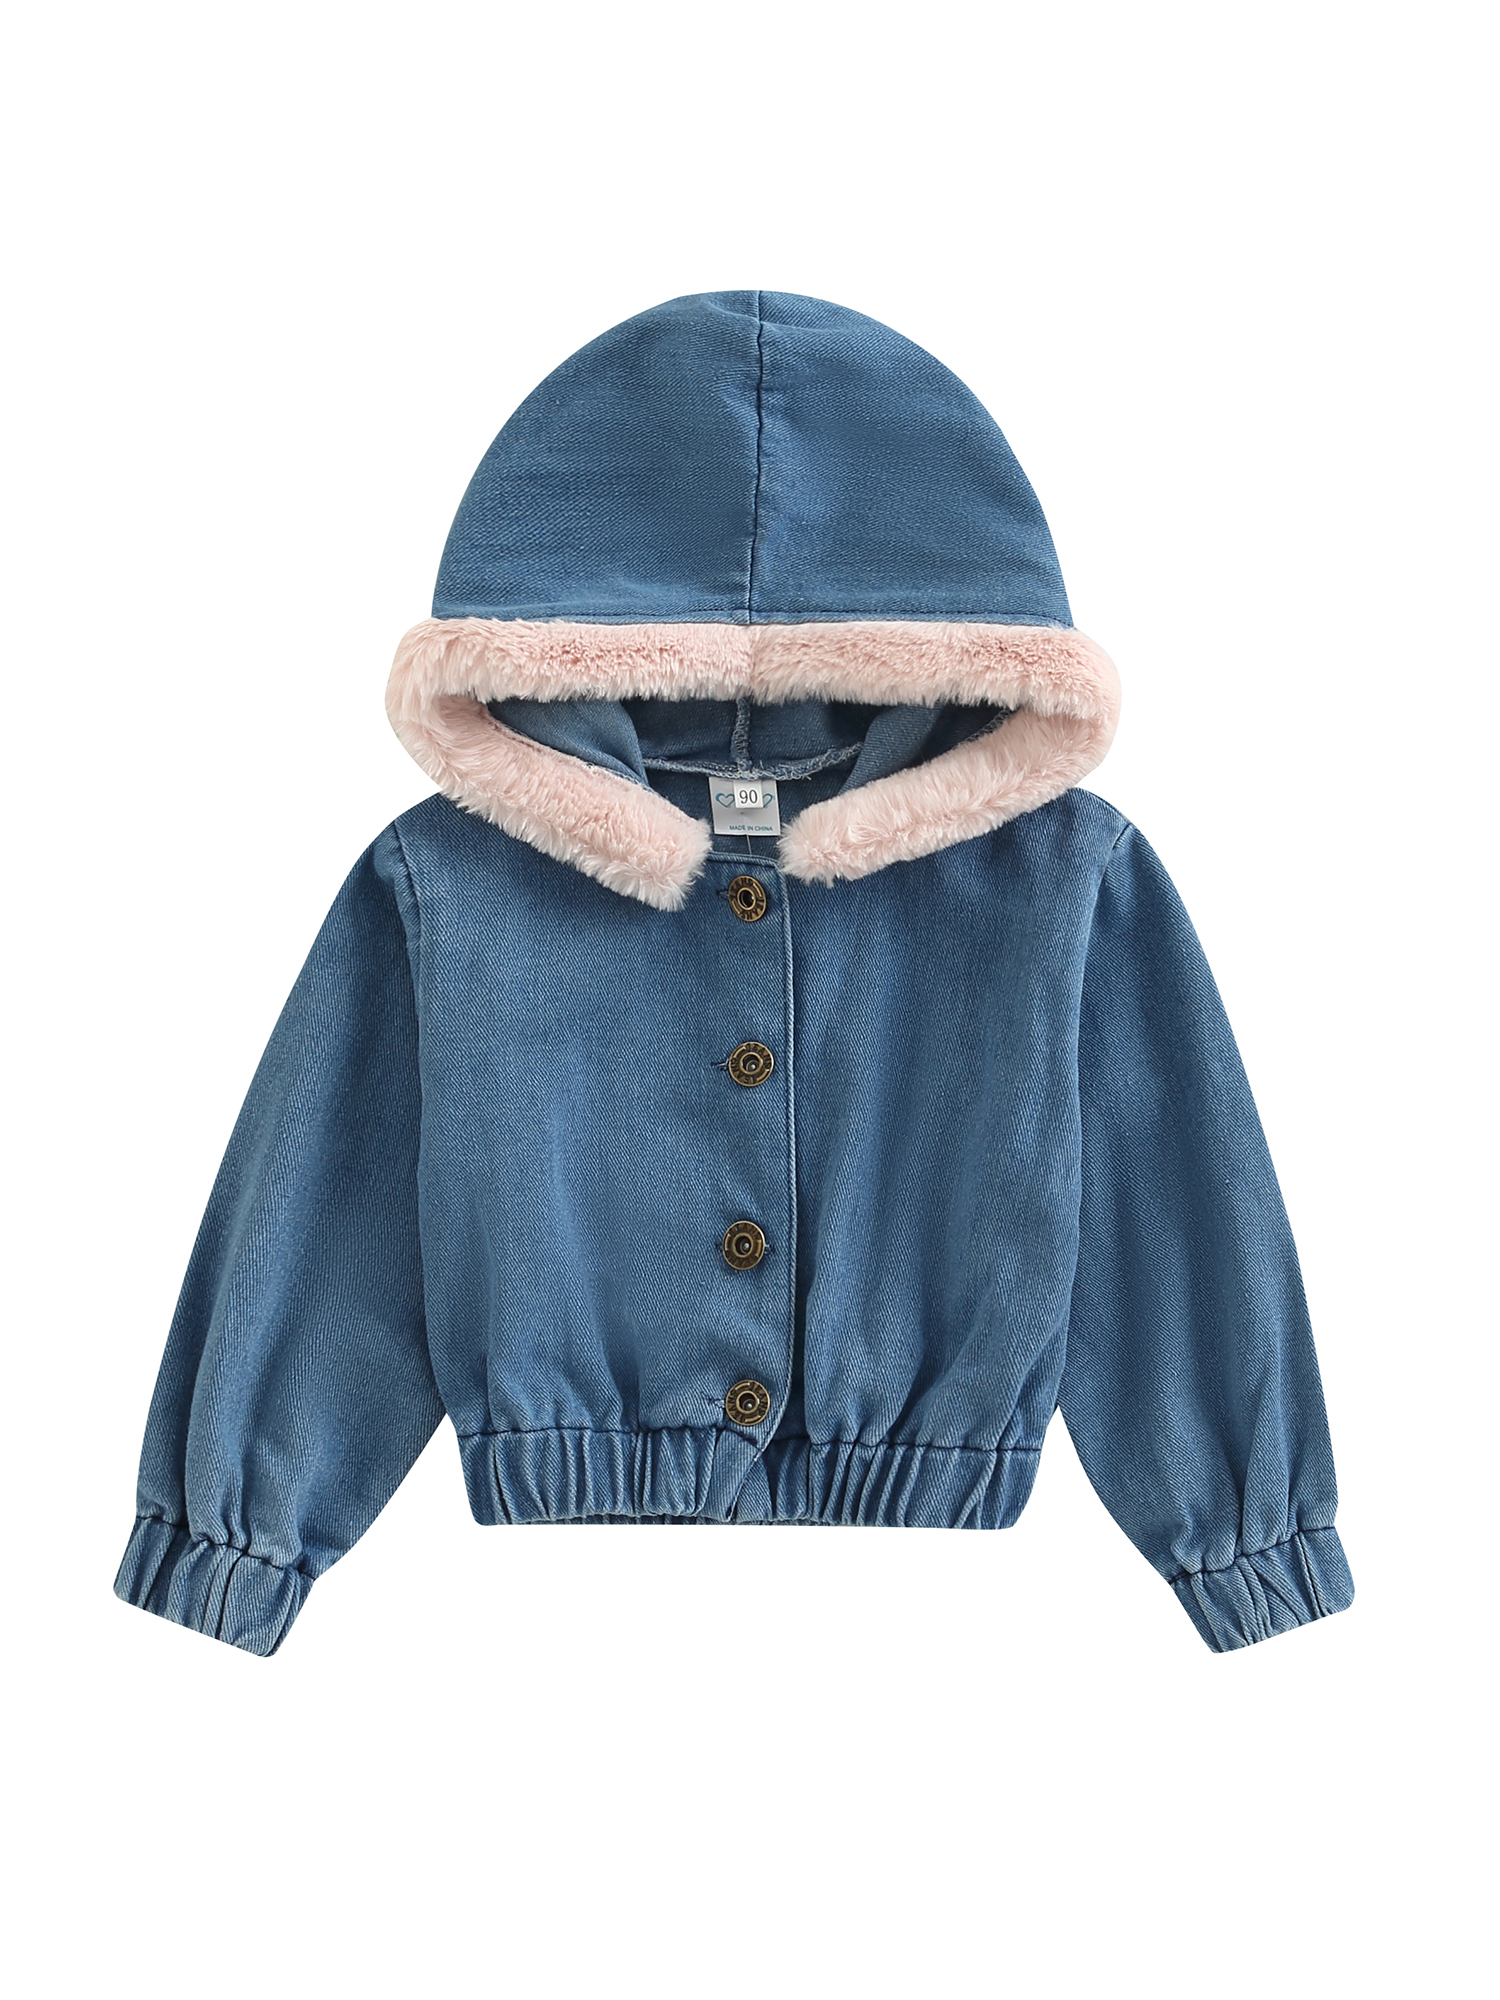 Jxzom Toddler Girls Hooded Denim Coat Long Sleeves Button Closure Thick Autumn Winter Jean Jacket - image 1 of 7